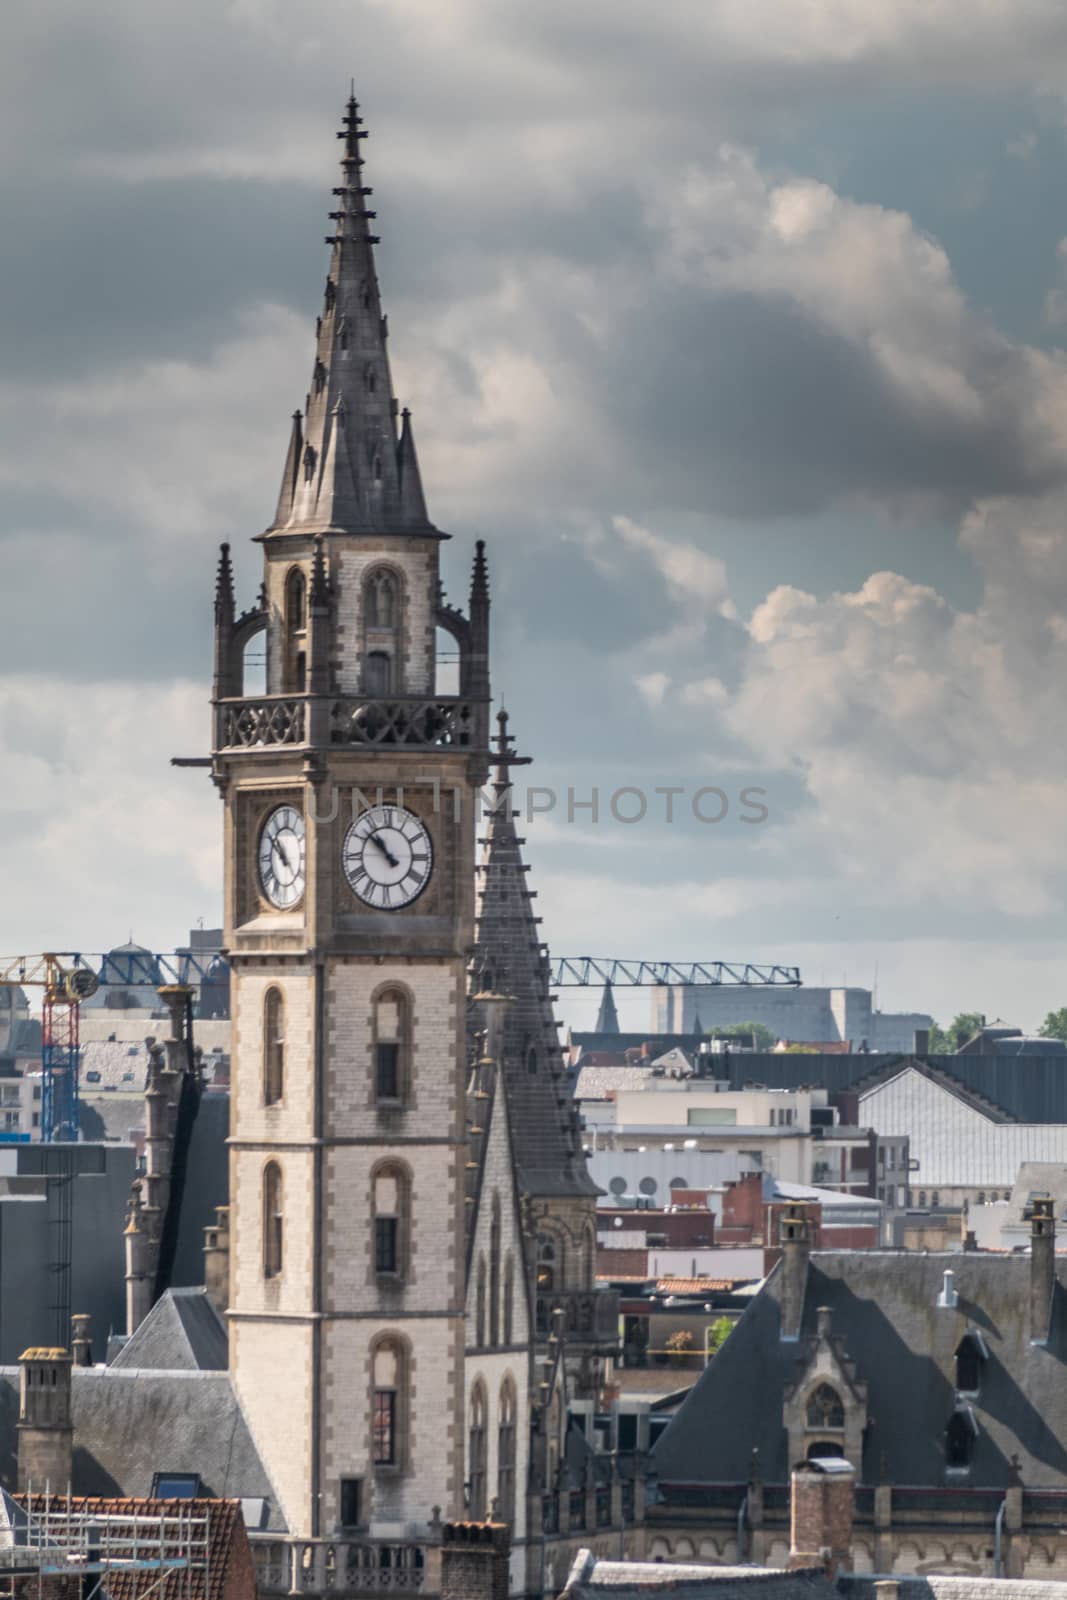 Gent, Flanders, Belgium -  June 21, 2019: Shot from castle tower, view over city roofs shows closeup of Postal Service tower under heavy white cloudscape with blue patches.